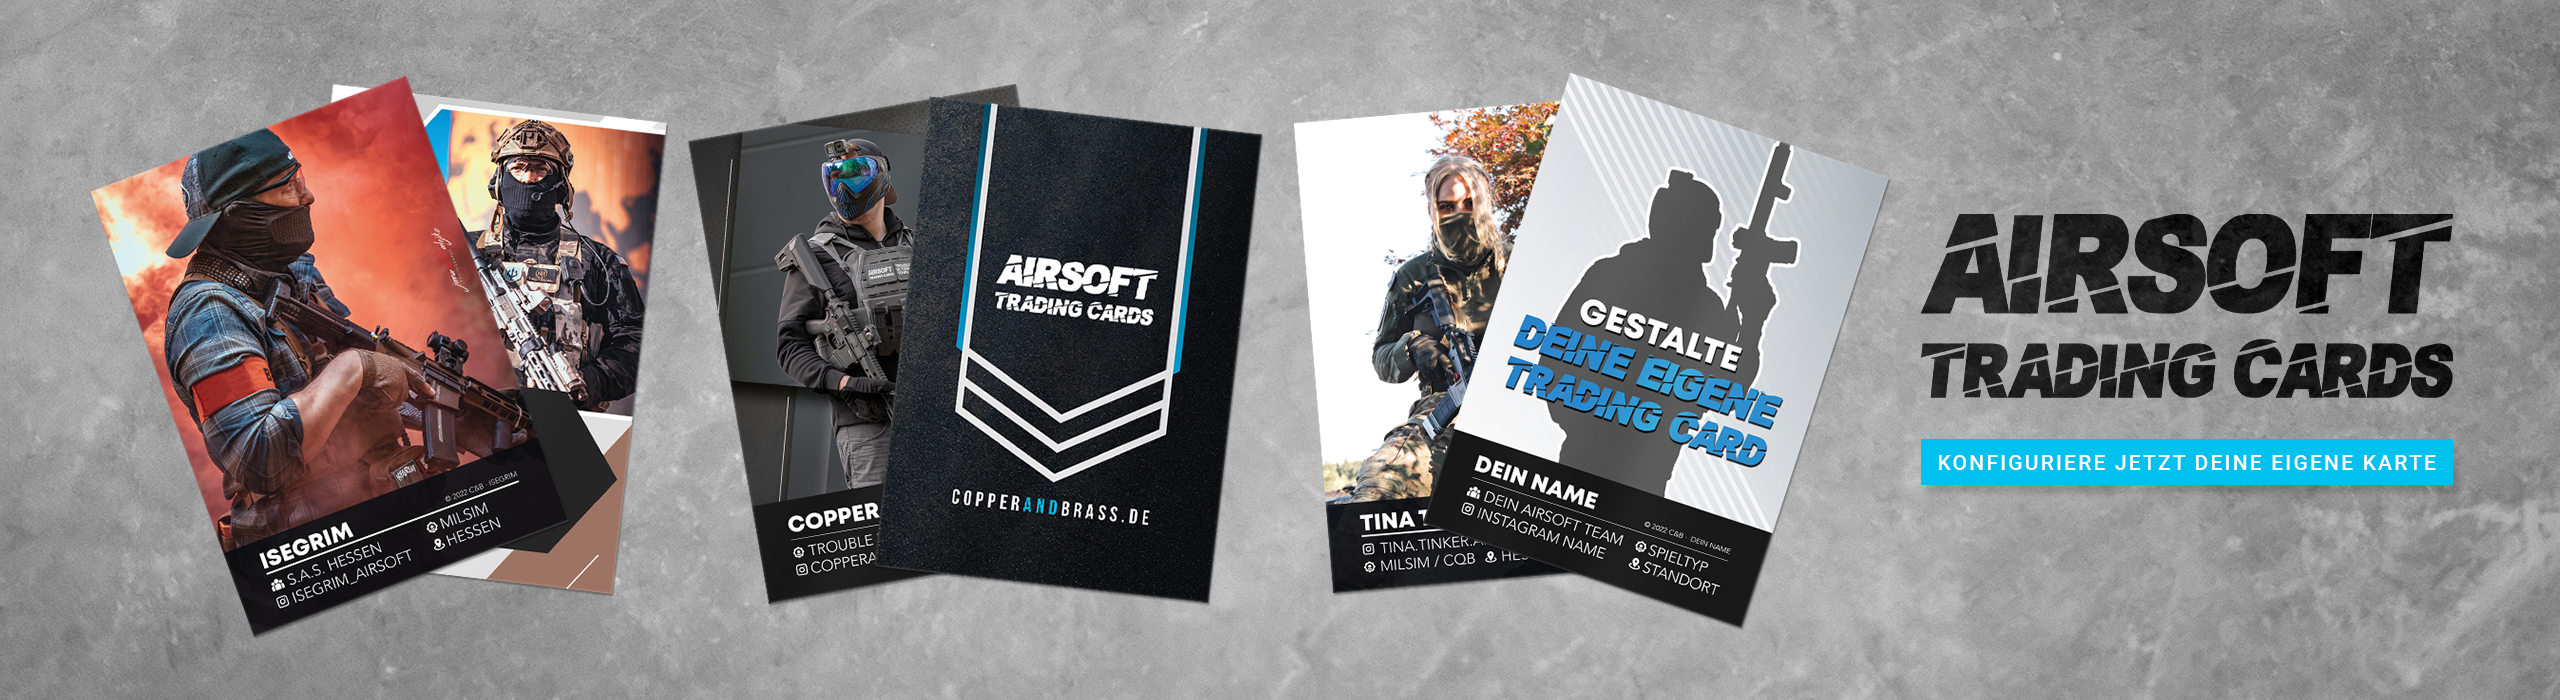 Airsoft Trading Cards Slider